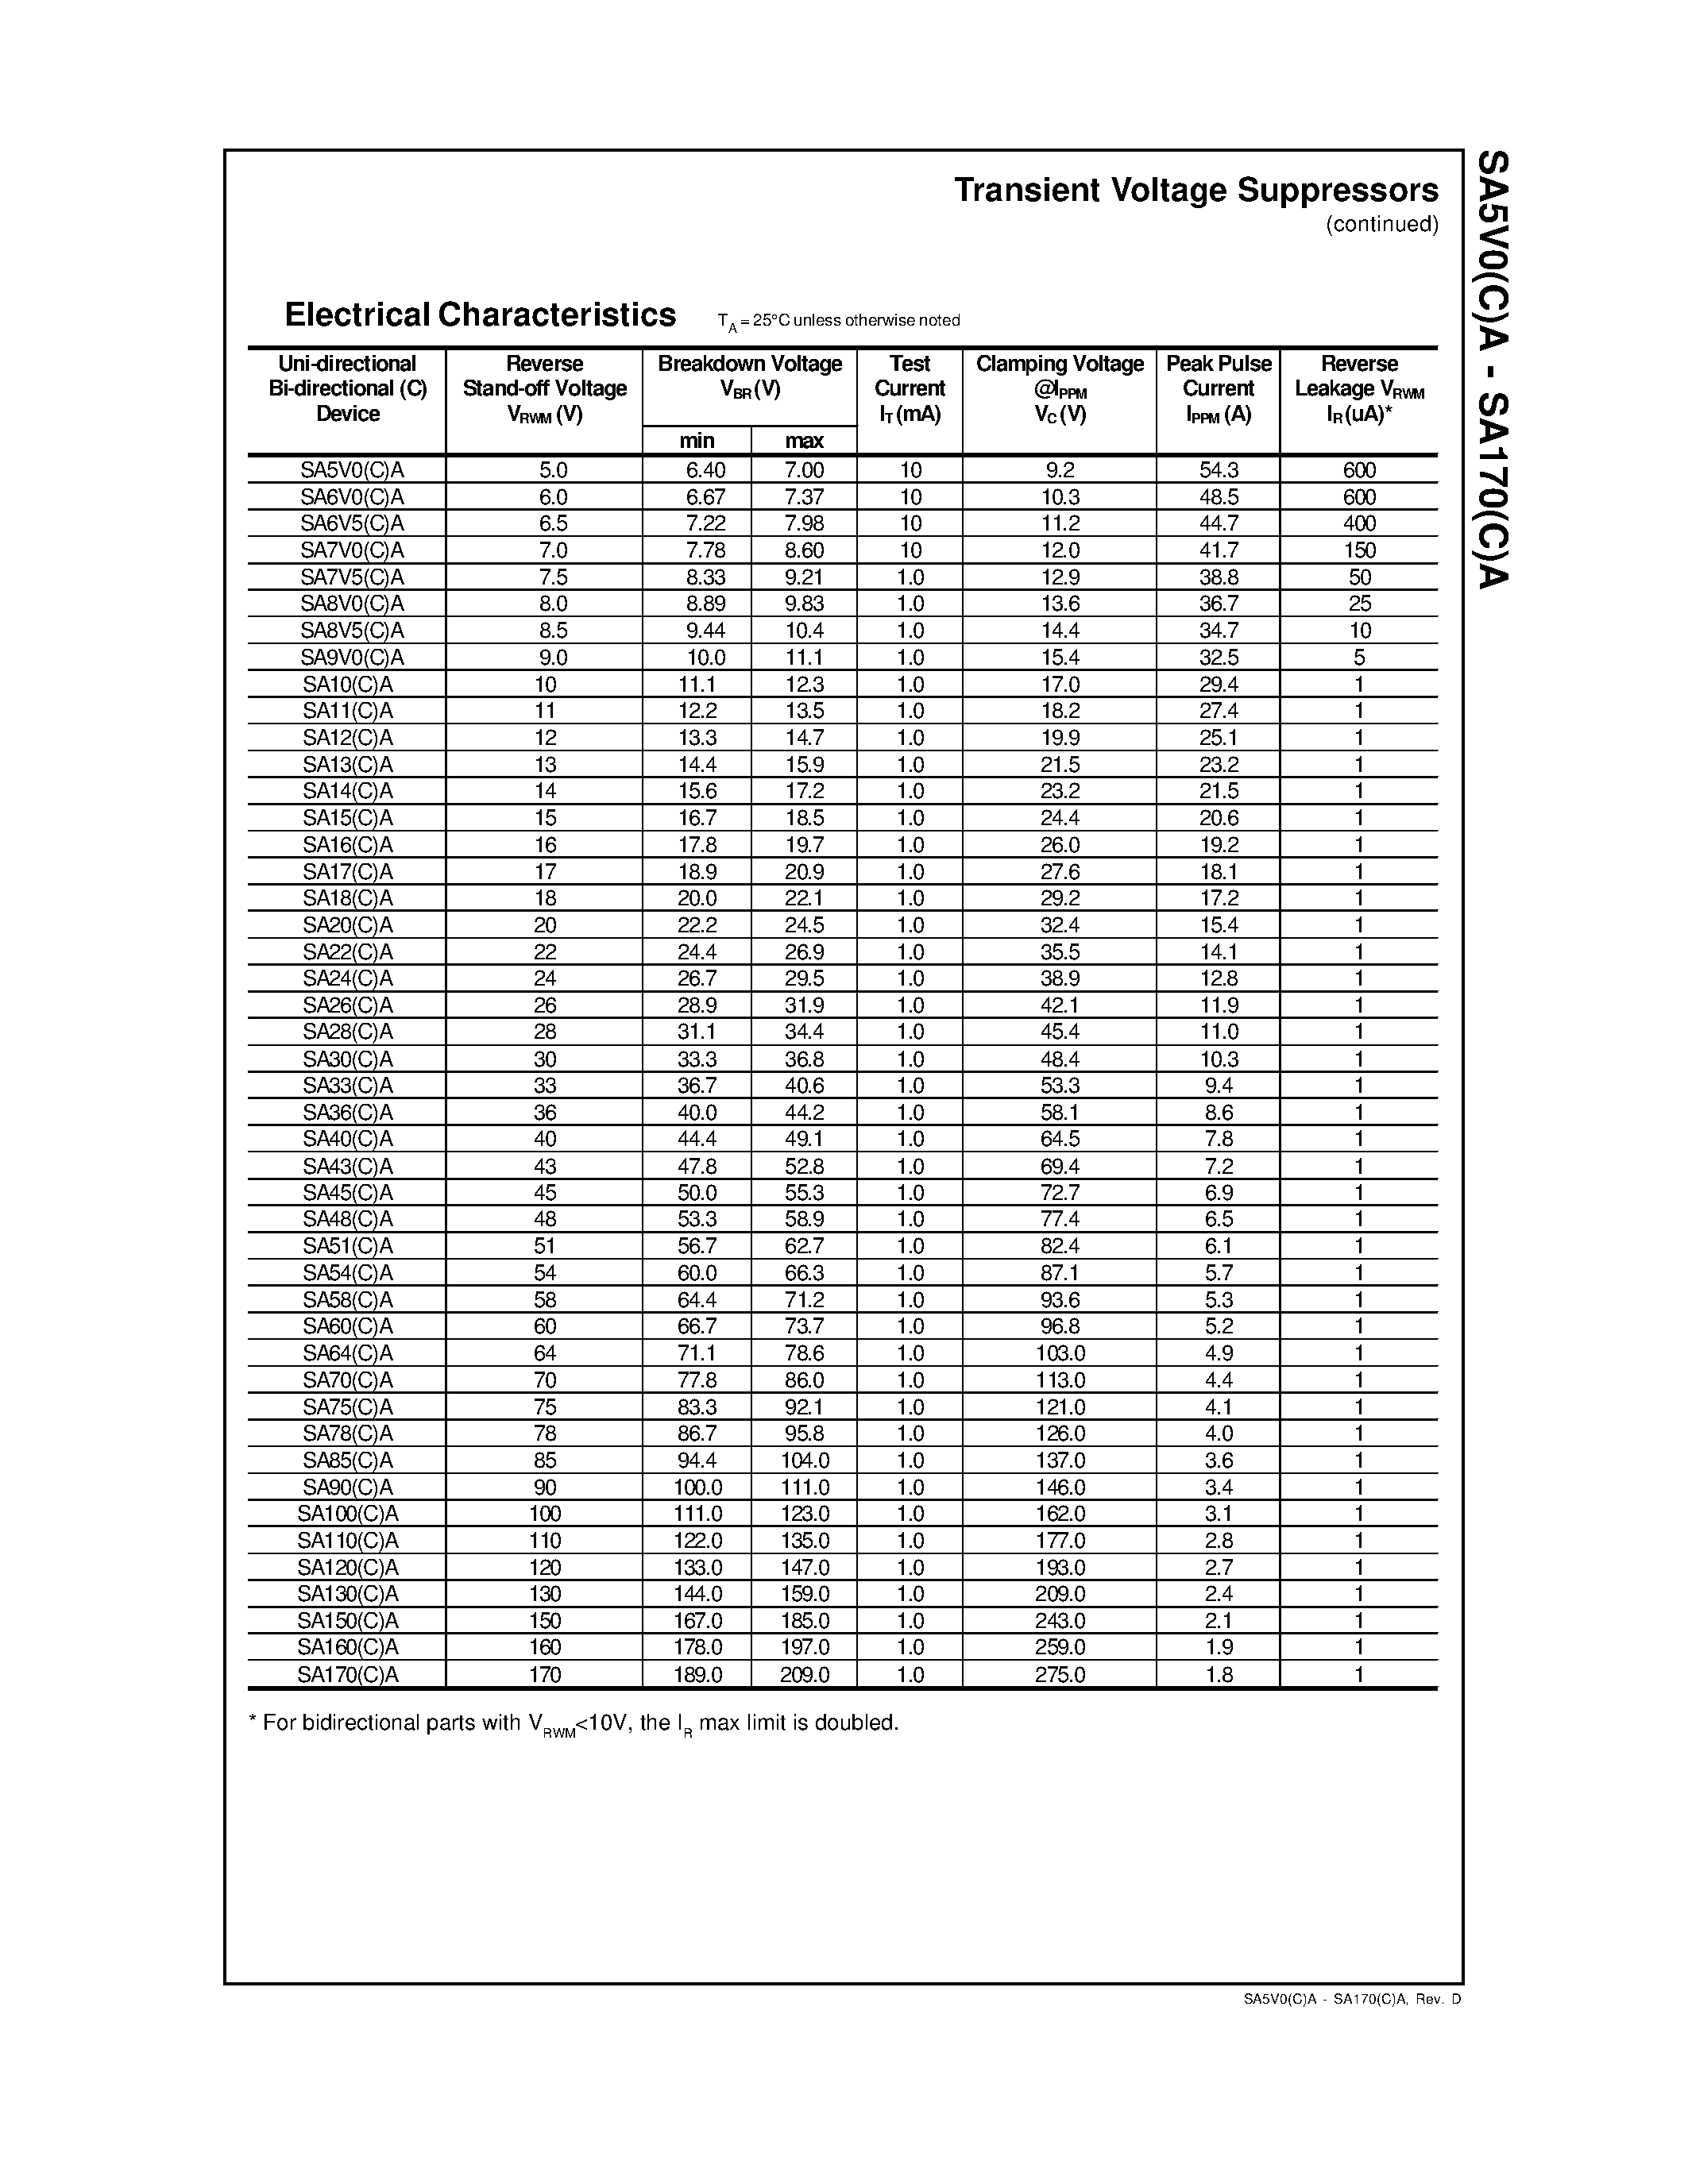 Datasheet SA28A - Transient Voltage Suppressors page 2